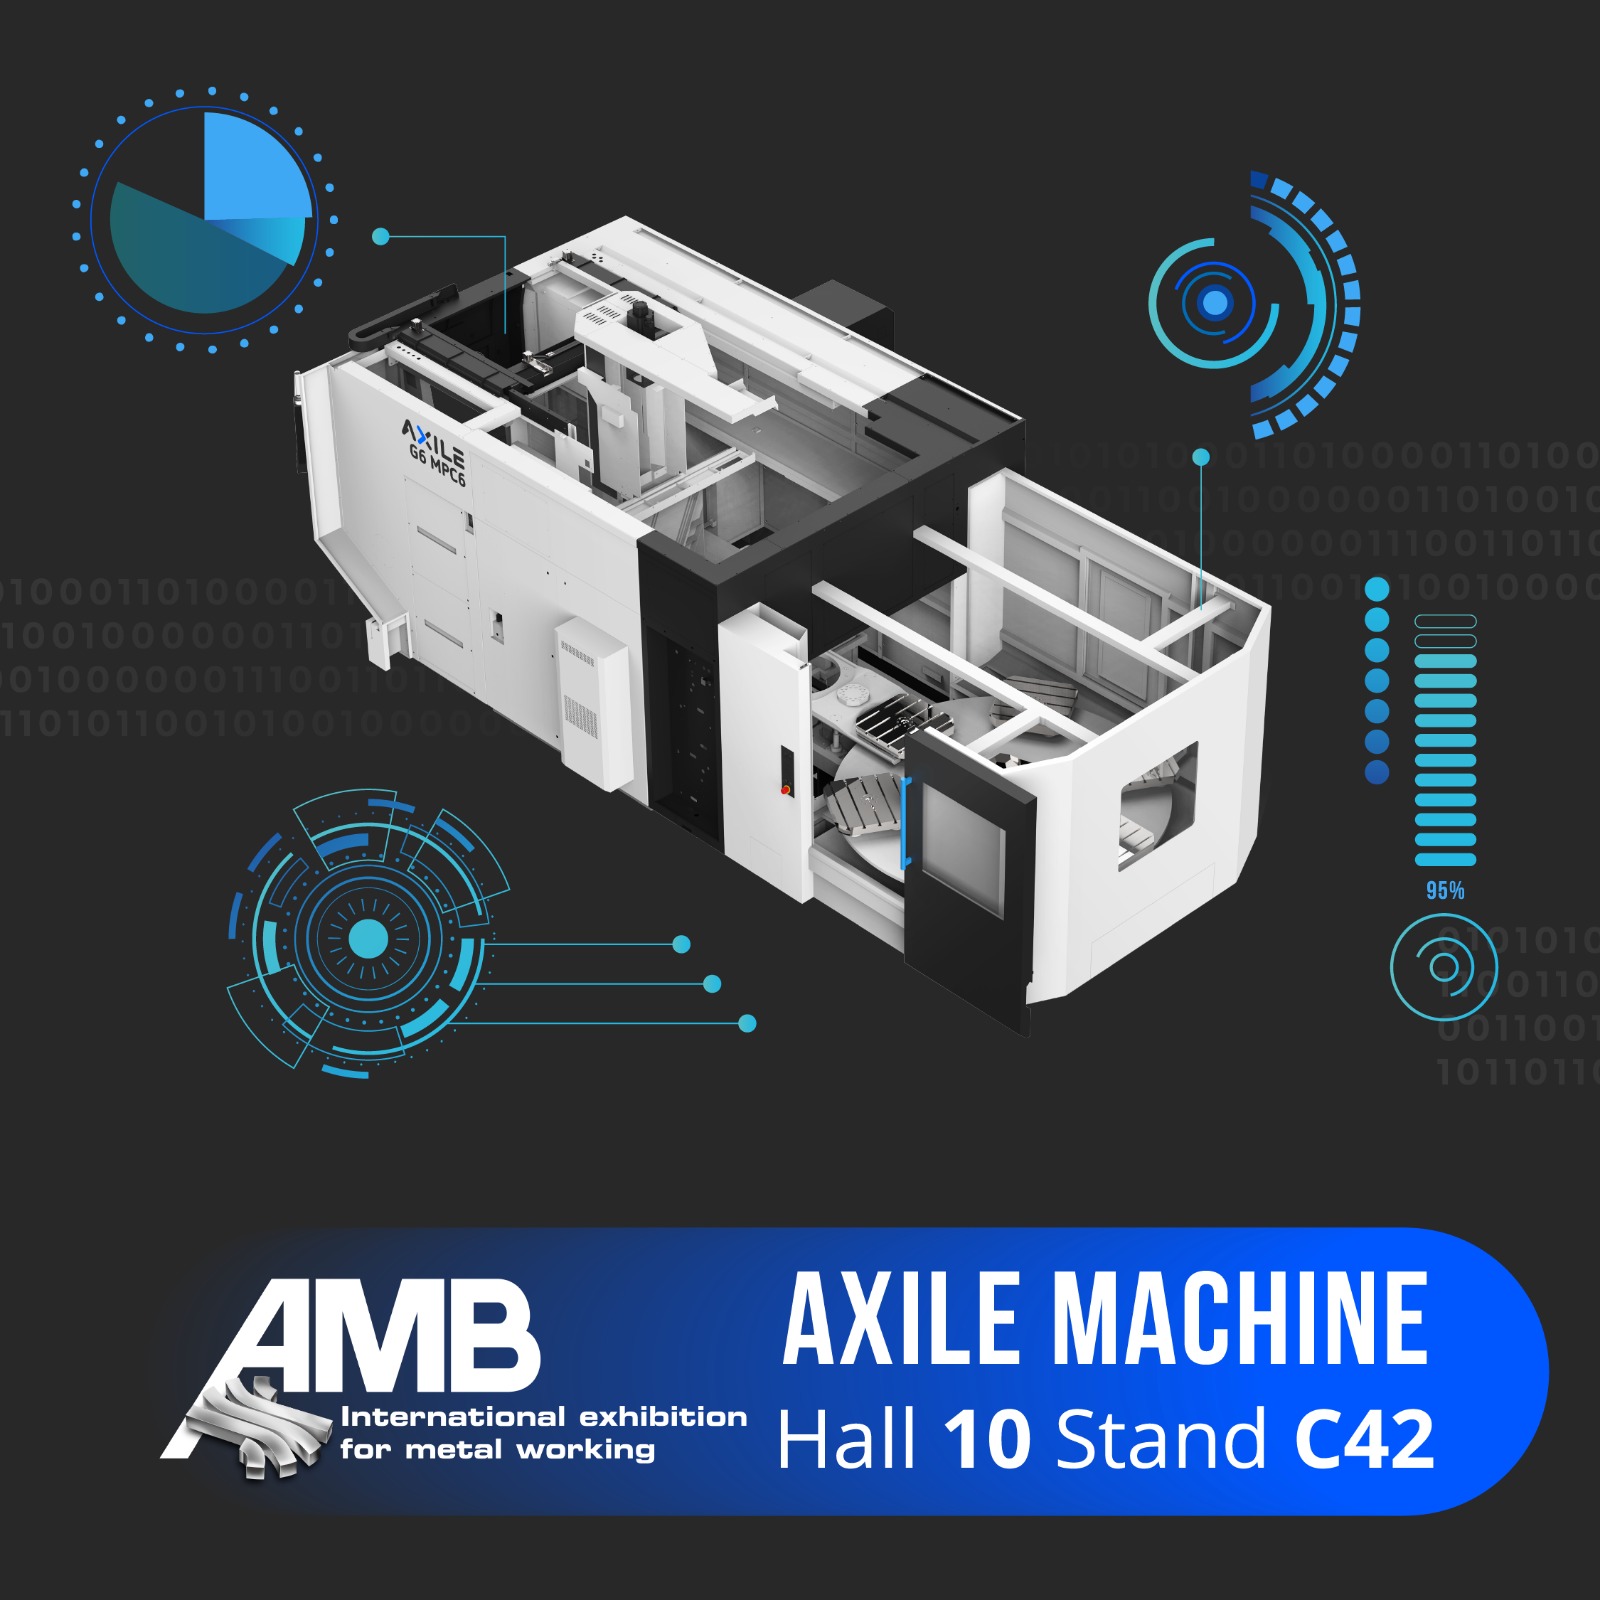 Products|High-speed 5axis VMC with intelligent monitoring technology and management